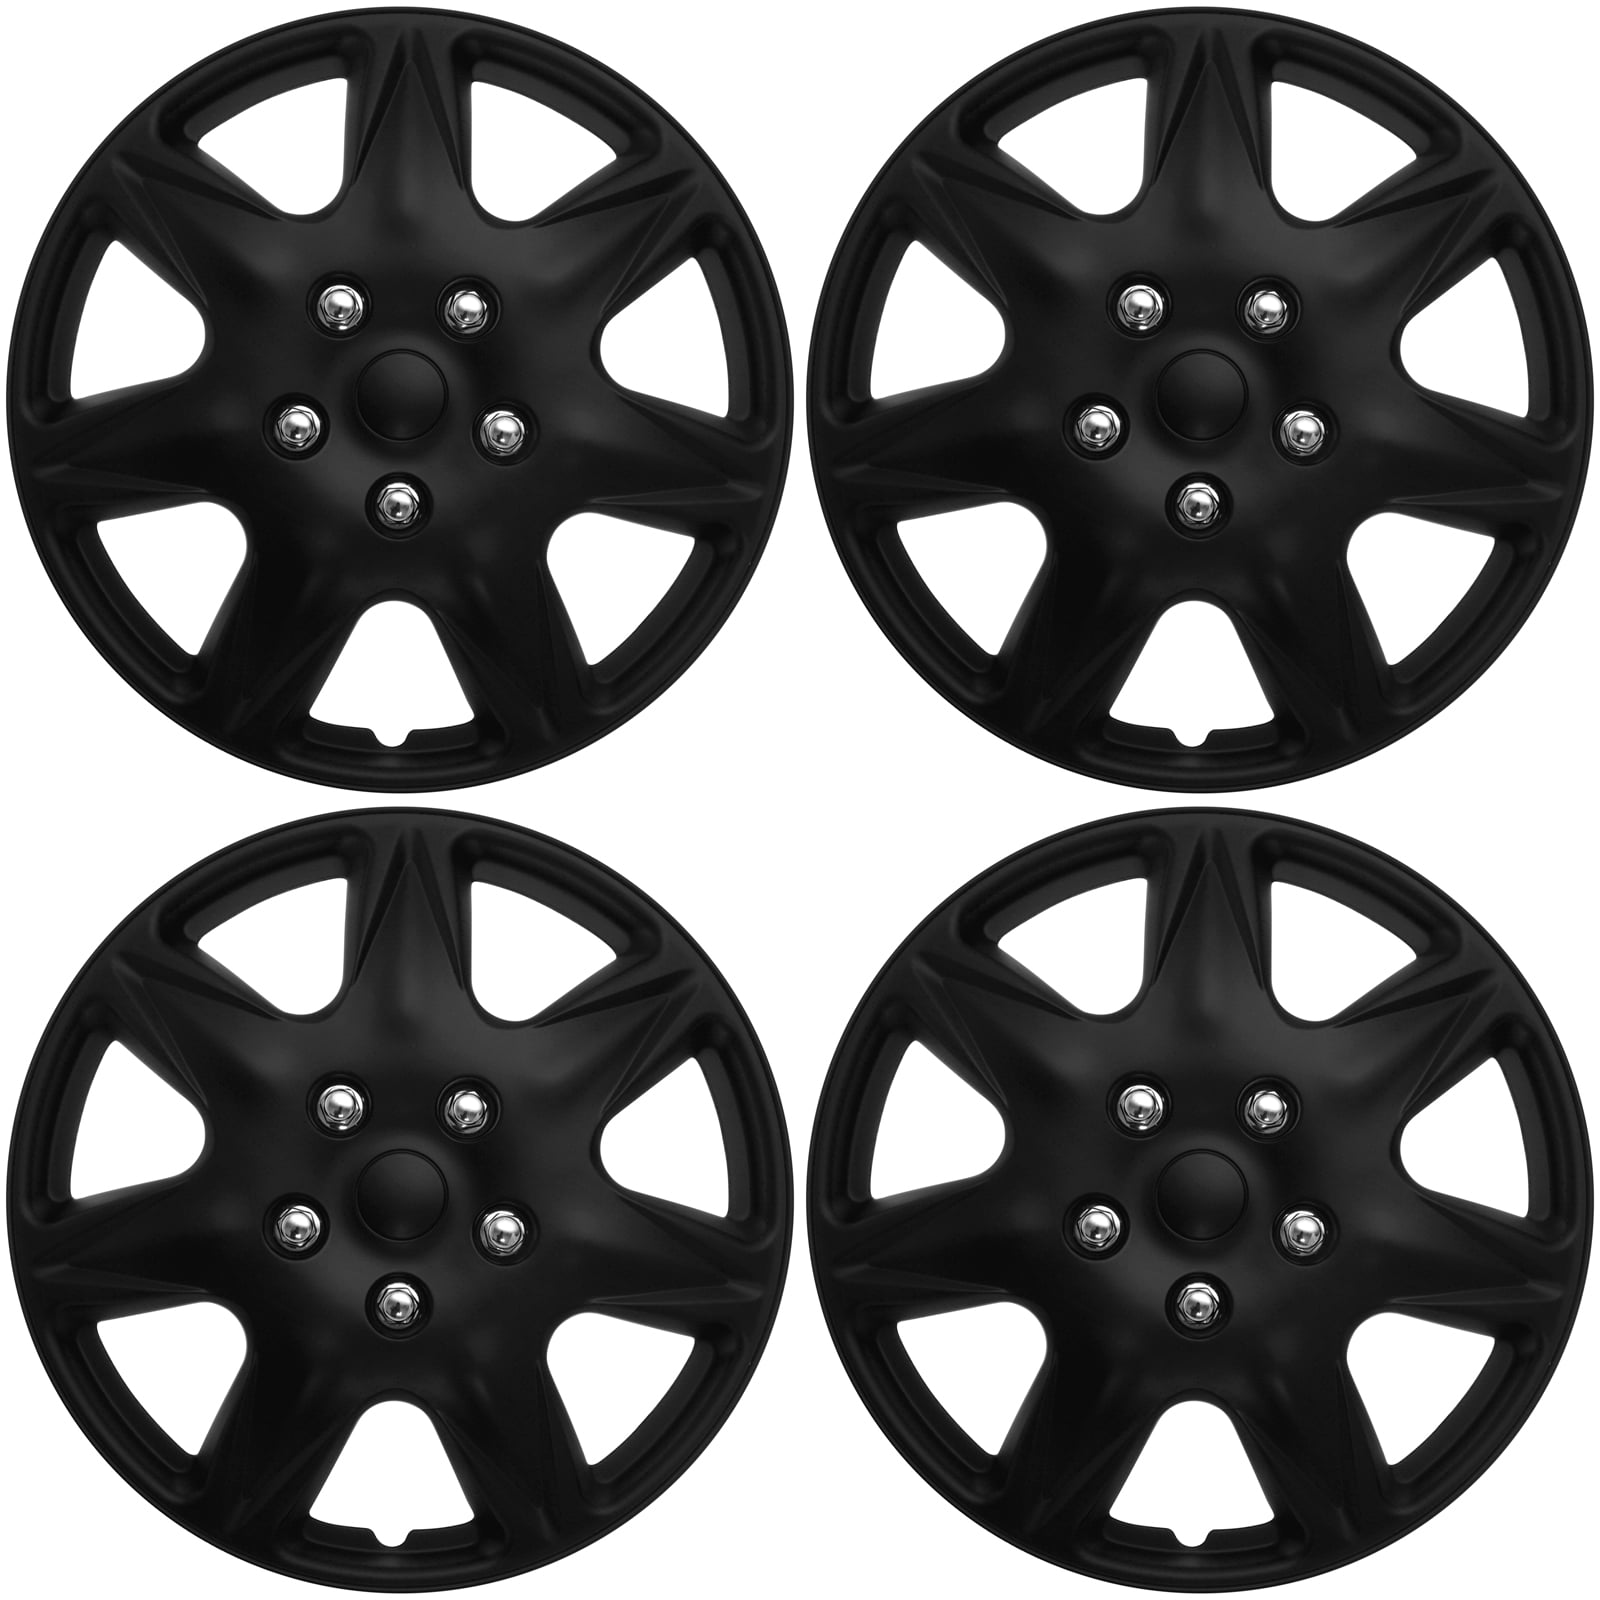 Cover Trend , Matte Black Hub Caps Wheel Covers Set of 4 ONLY FITS 17 inch wheels that take hubcaps 